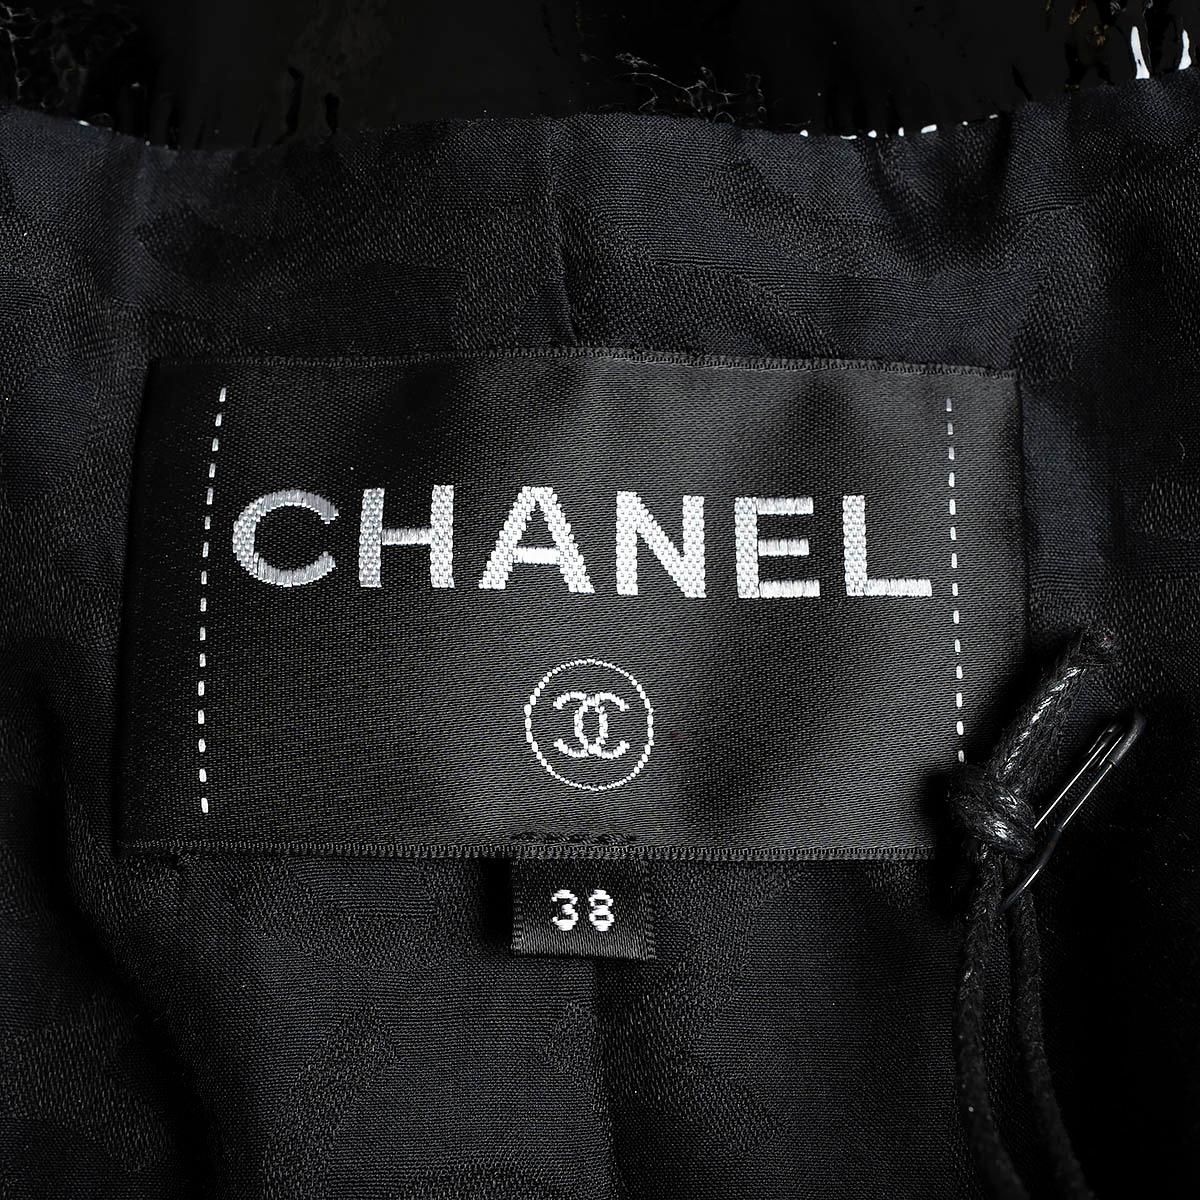 CHANEL black leather & patent 2018 18S TRENCH Coat Jacket 38 S For Sale 5